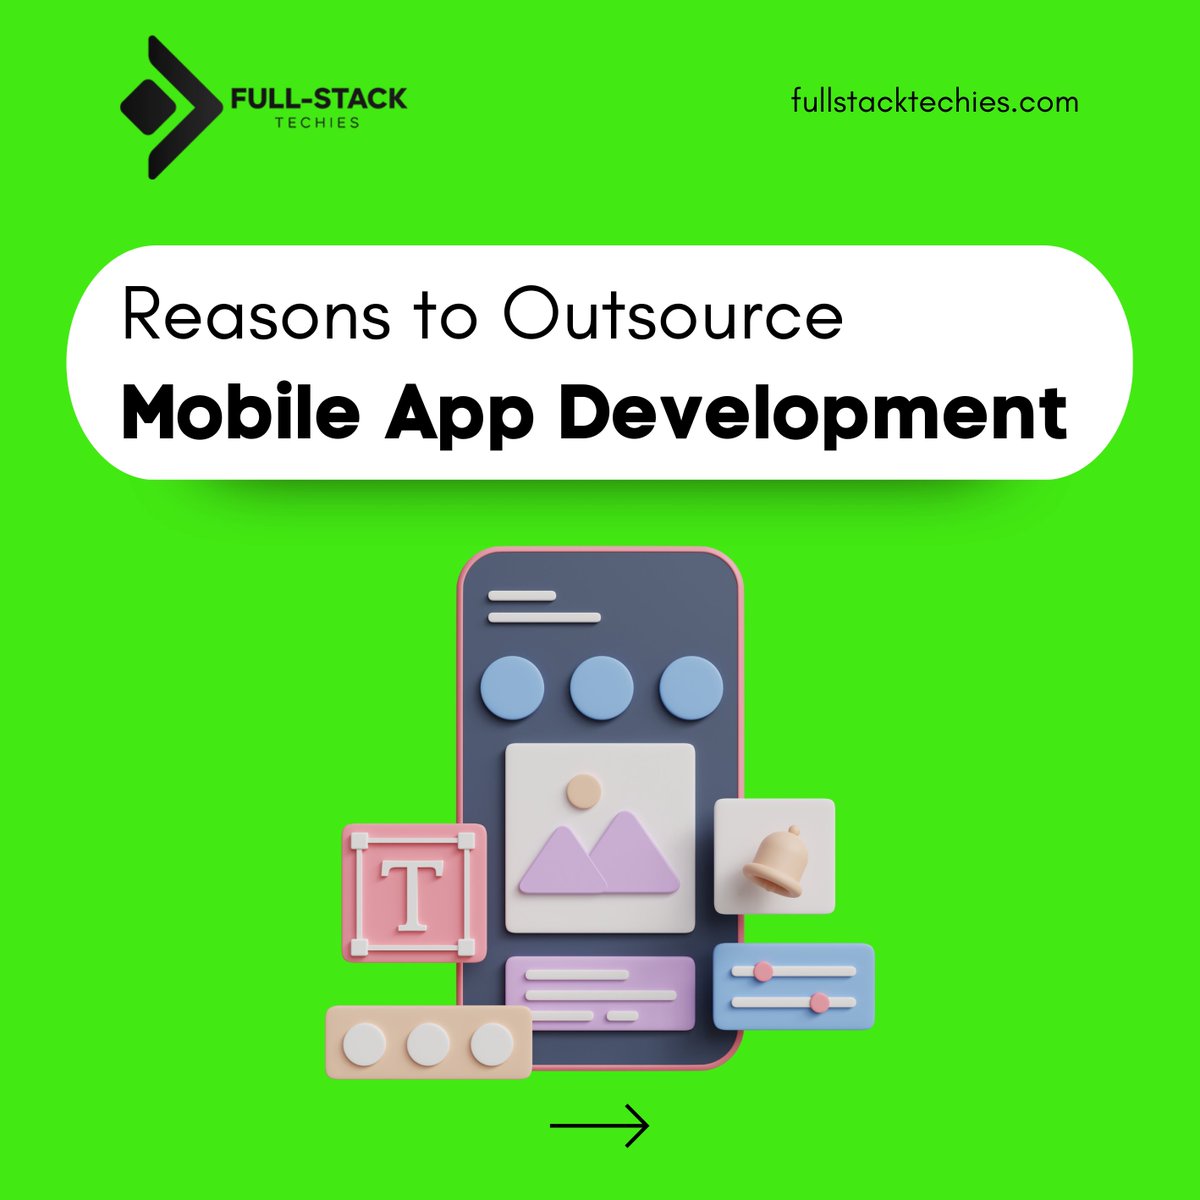 Reasons to Outsource Mobile App Development.

Read More about them from the link in the comment.

#mobileappdesign #mobileappdevelopment #mobileappdevelopmentcompany #mobileappdeveloper #mobileappdevelopmentservices #mobileappsolutions